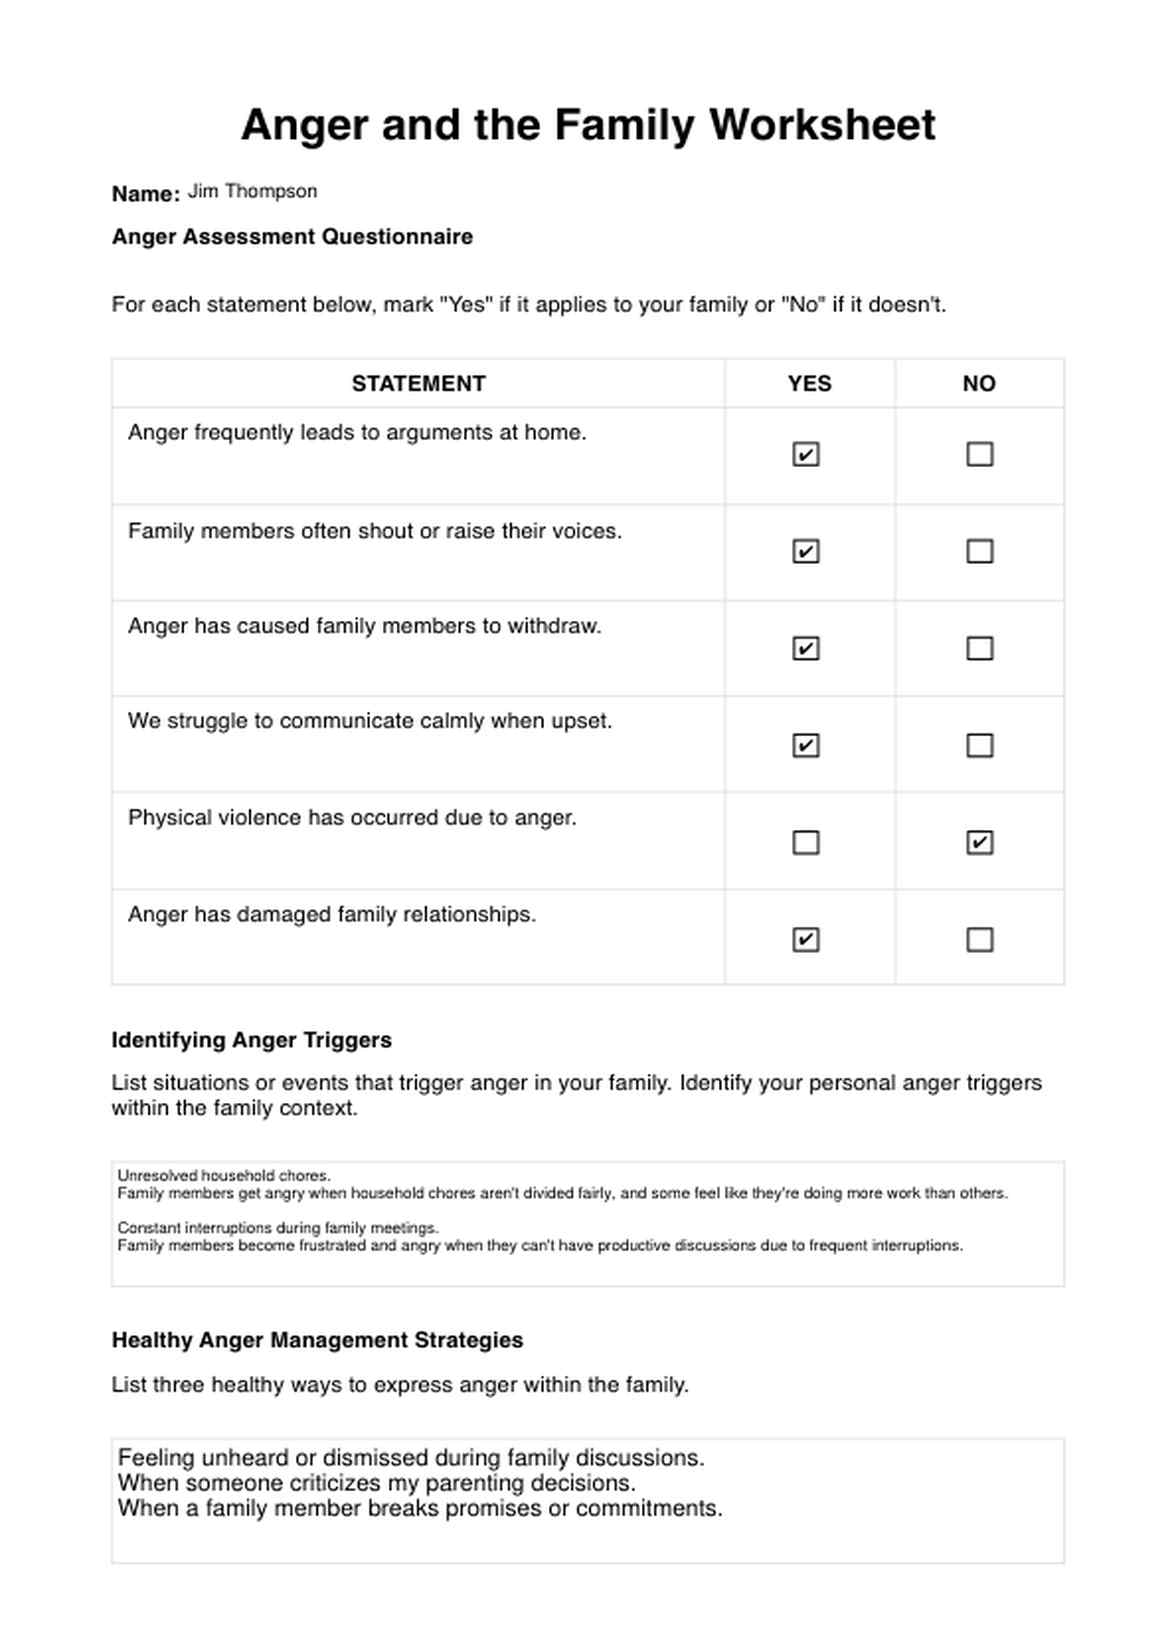 Anger and the Family Worksheet PDF Example